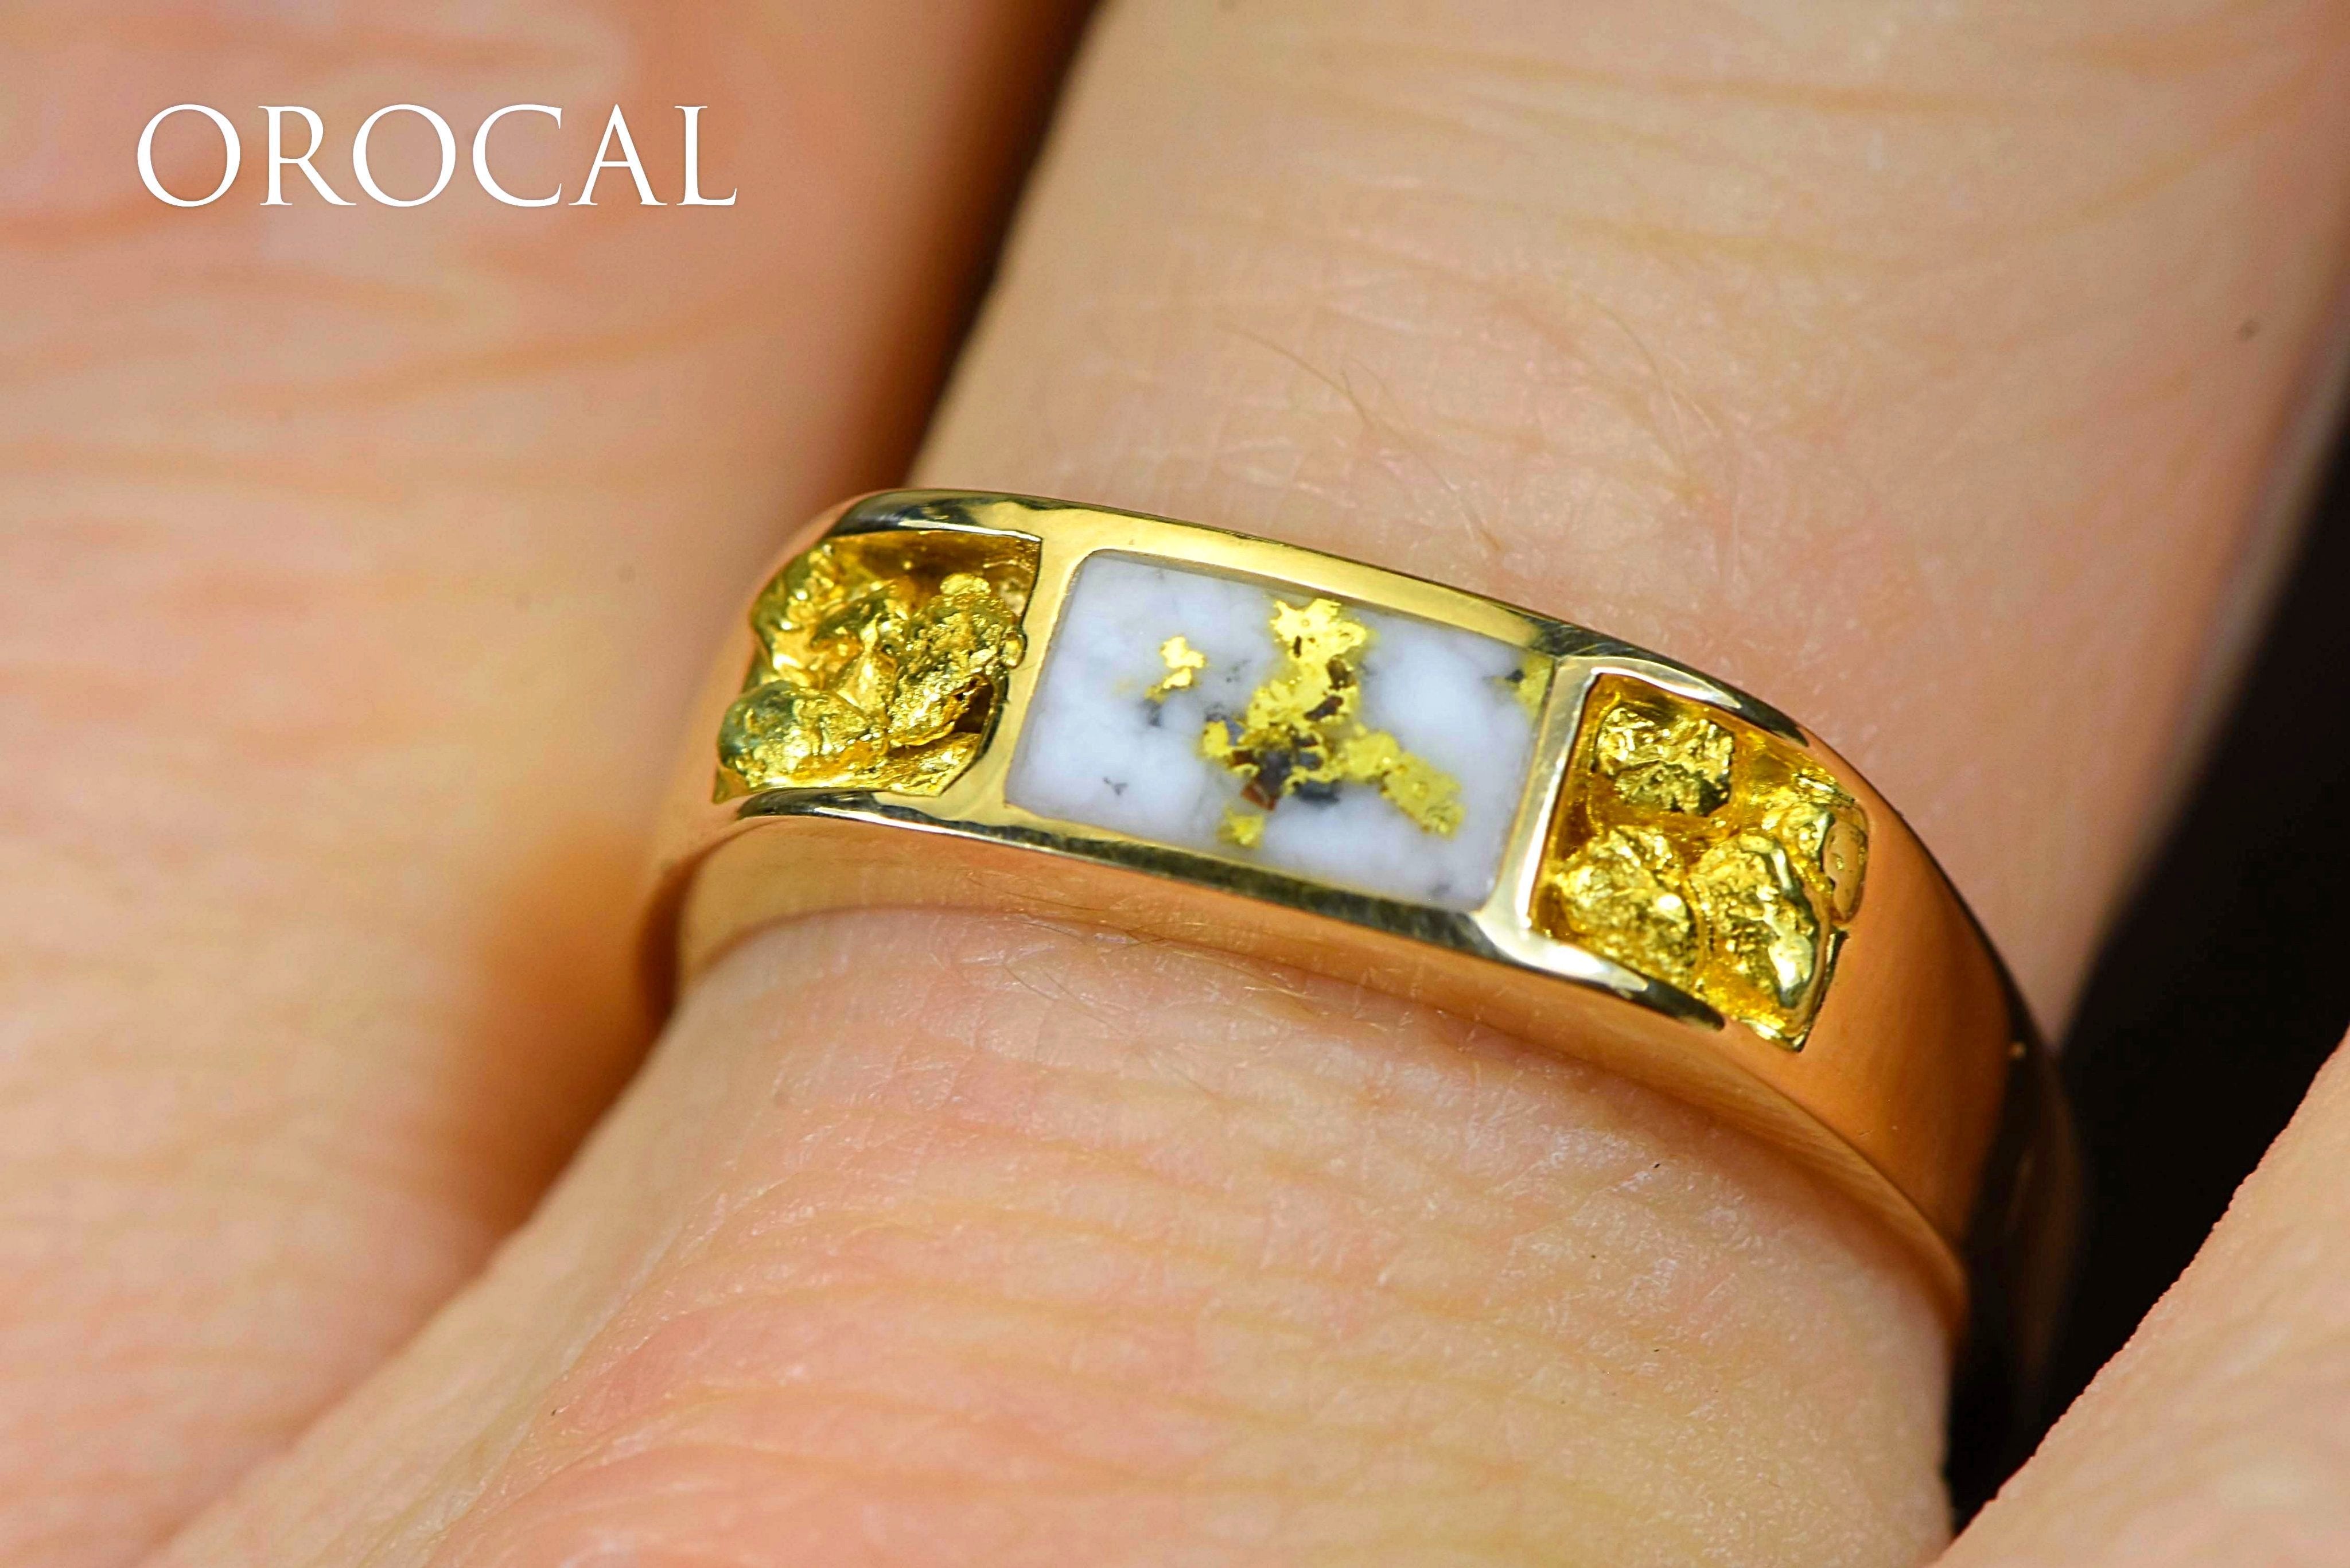 Gold Quartz Ring "Orocal" RM656NQ Genuine Hand Crafted Jewelry - 14K Gold Casting